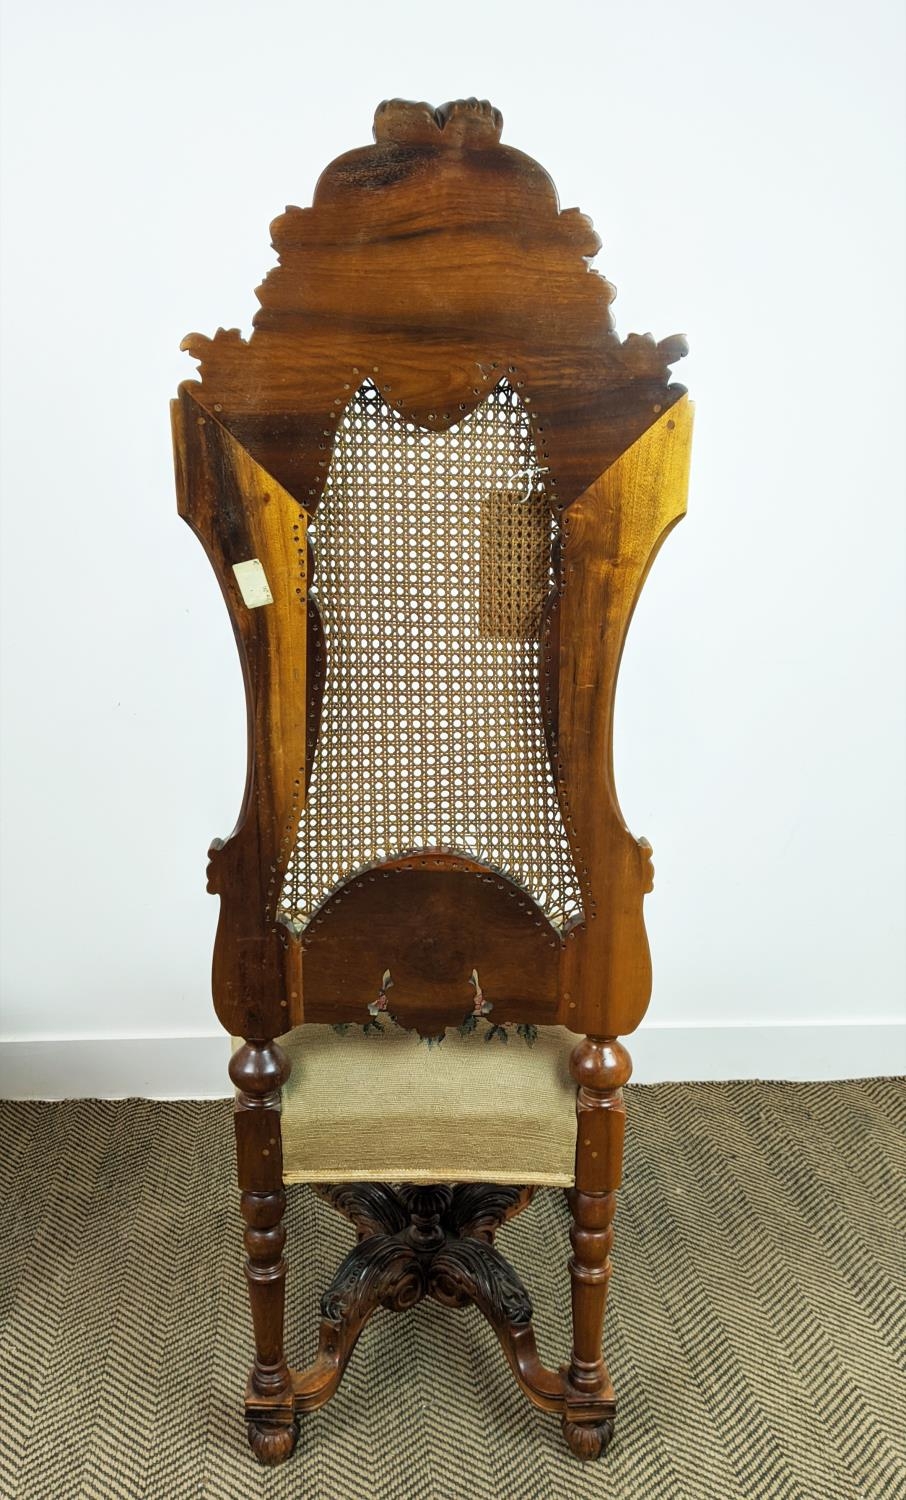 SIDE CHAIRS, a pair, 19th century Dutch with carved showframes with caned back panels and - Image 10 of 10